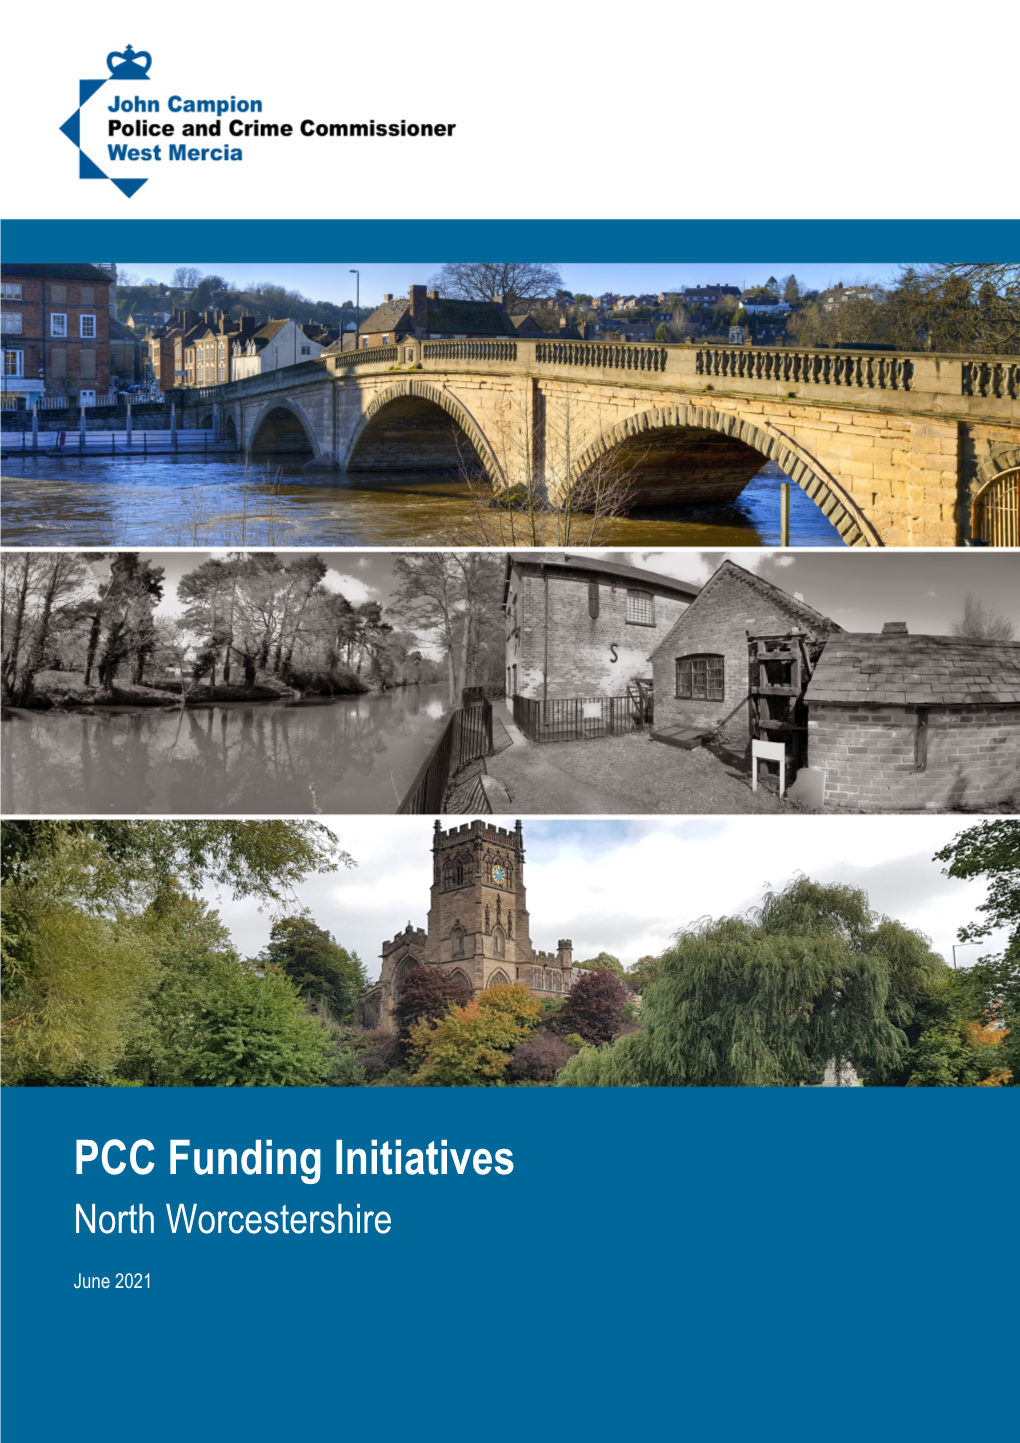 PCC Funding Initiatives North Worcestershire